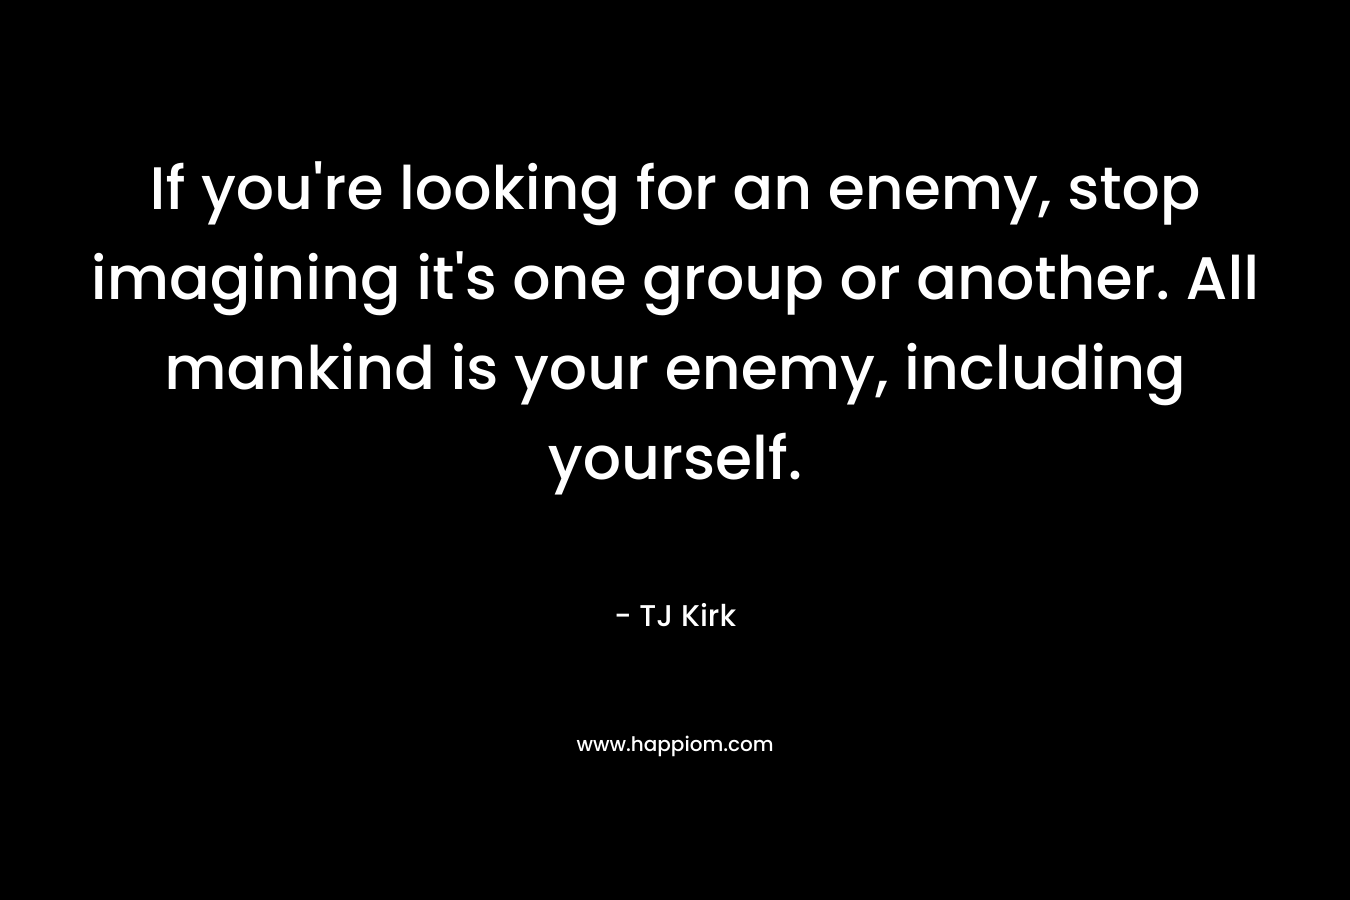 If you’re looking for an enemy, stop imagining it’s one group or another. All mankind is your enemy, including yourself. – TJ Kirk